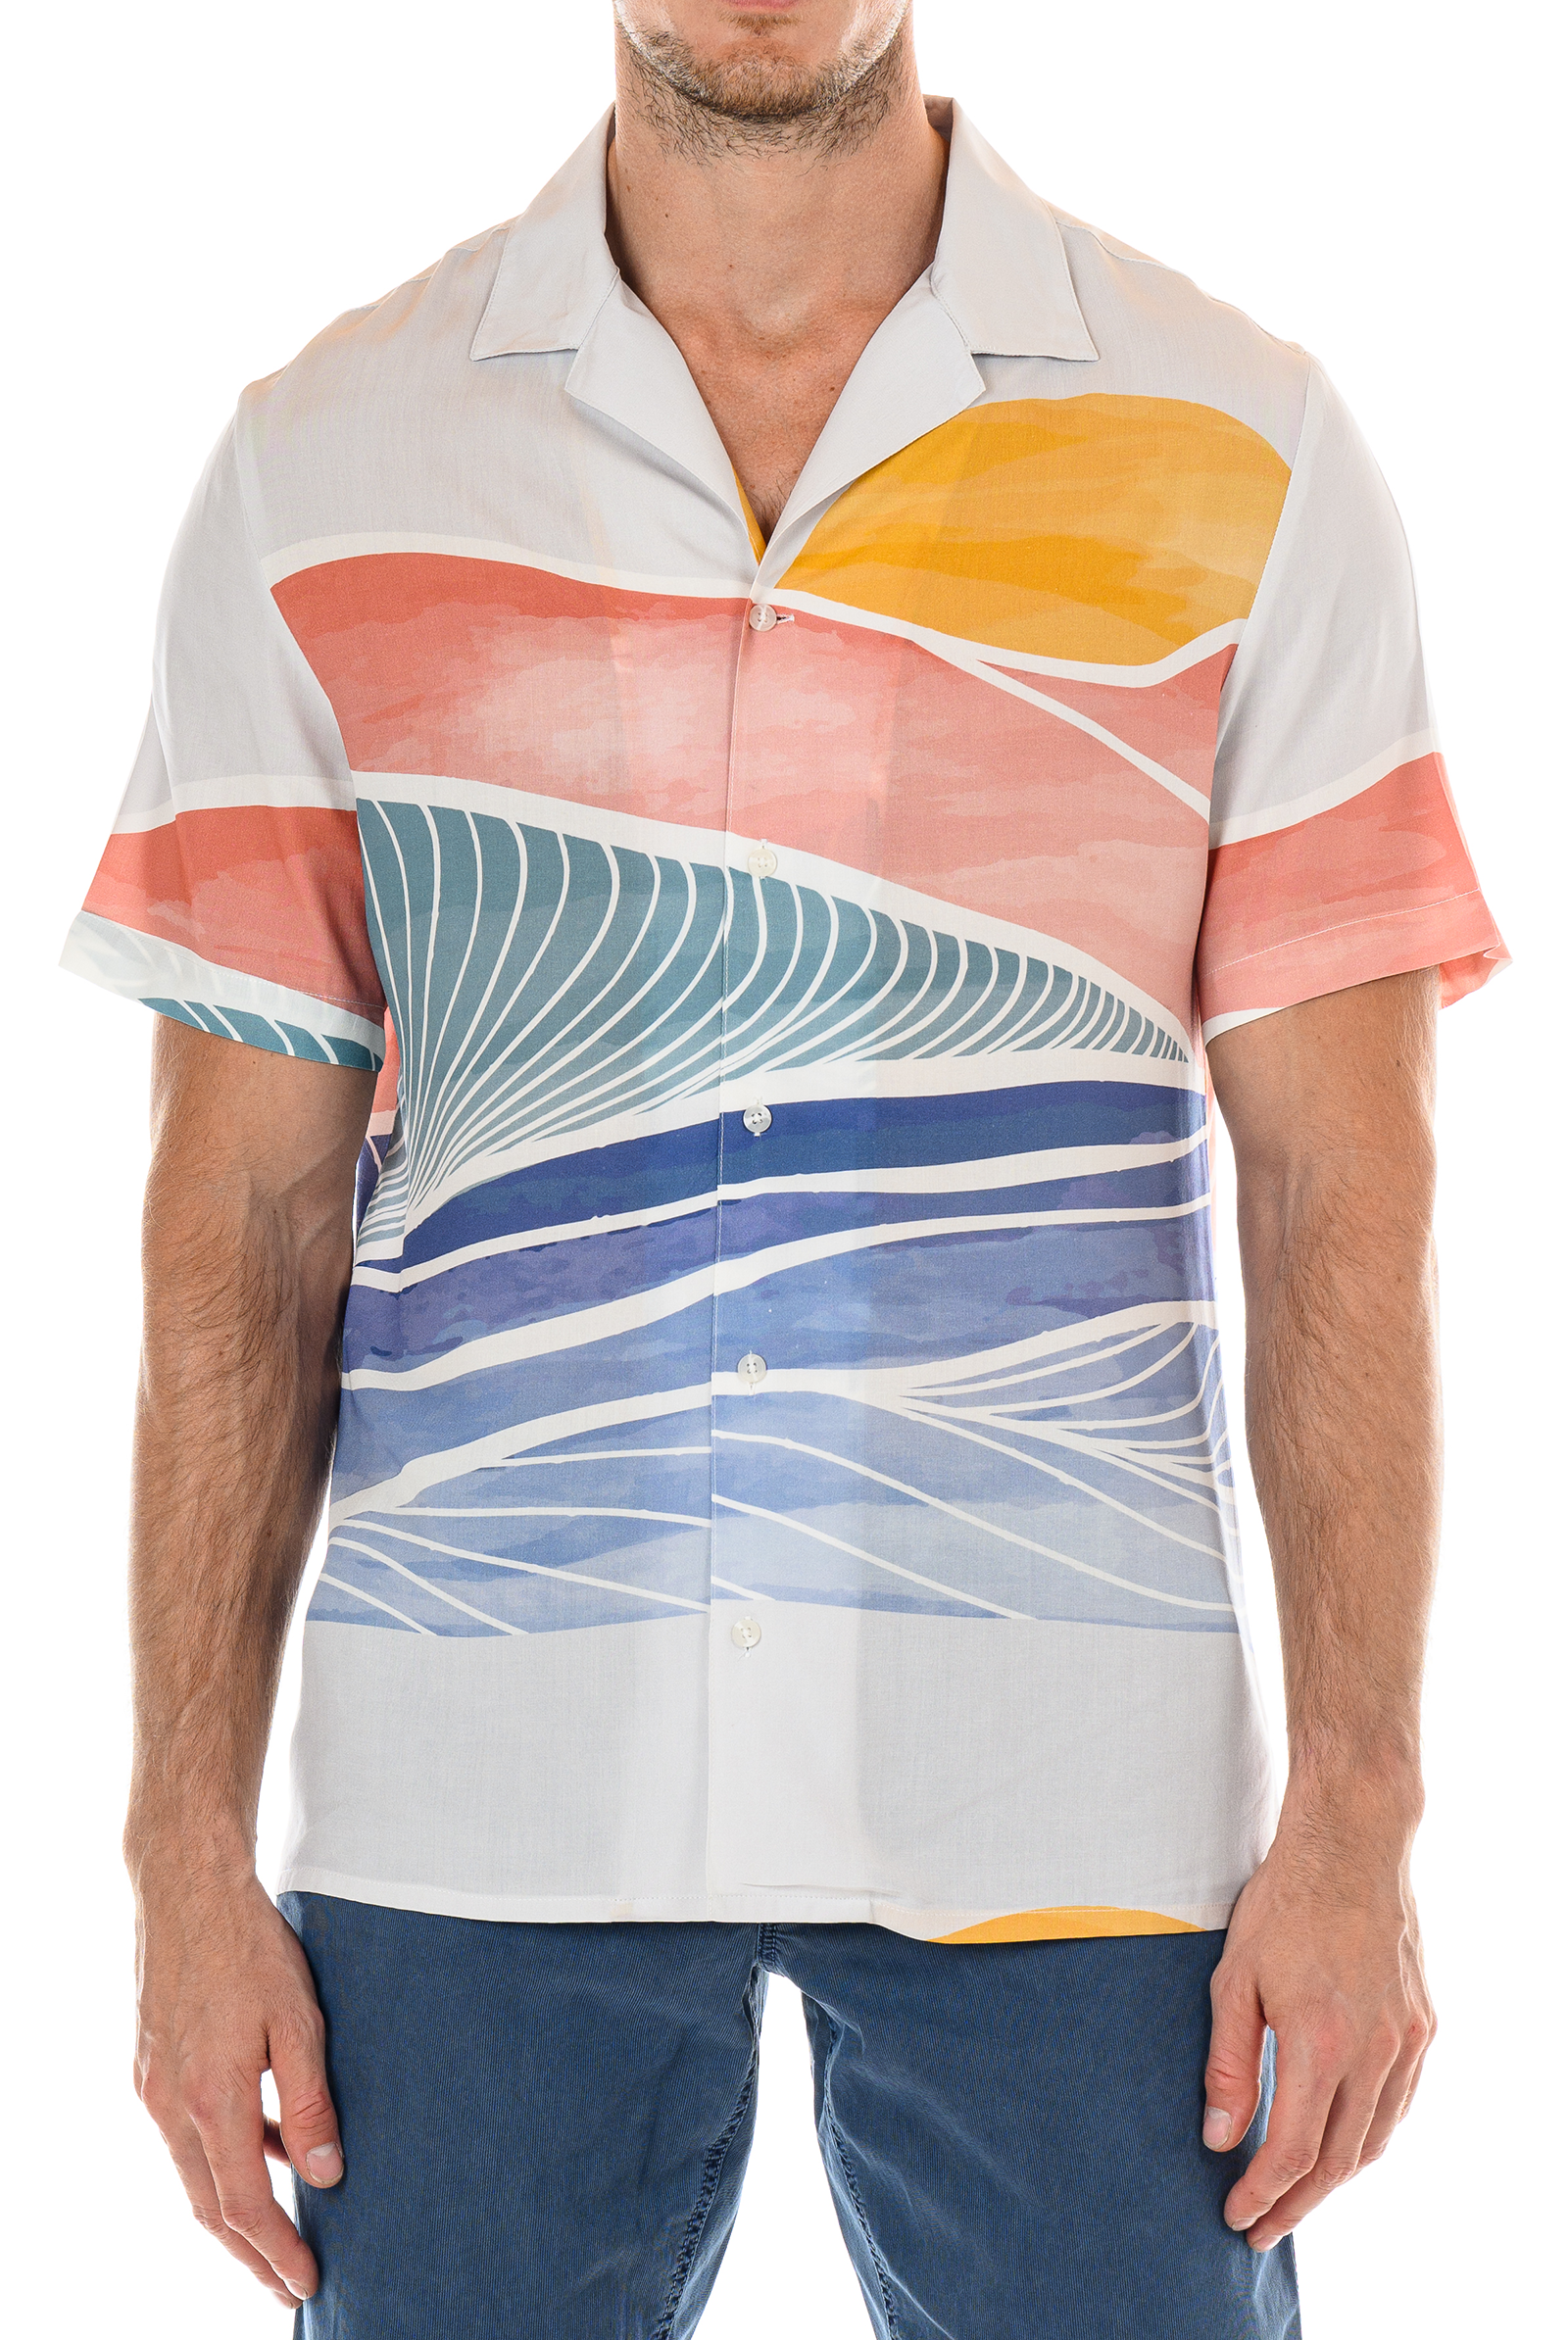 Rio Sunrise Shirt-Men's Tops-Vixen Collection, Day Spa and Women's Boutique Located in Seattle, Washington